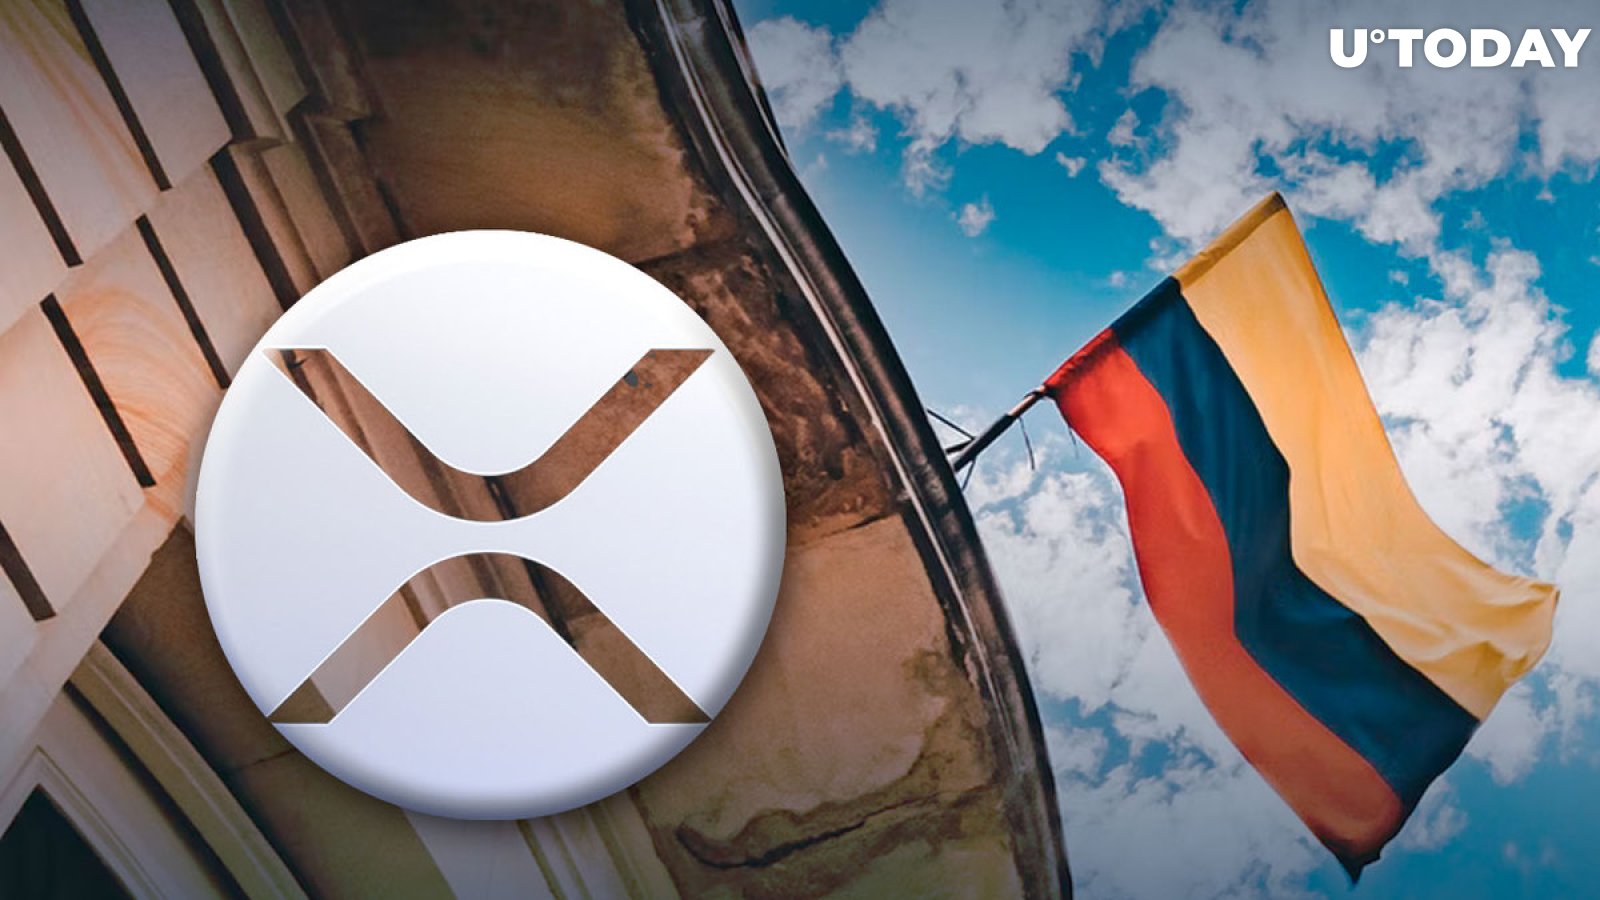 Ripple: Government of Colombia Set to Utilize XRPL Blockchain for Land Registry